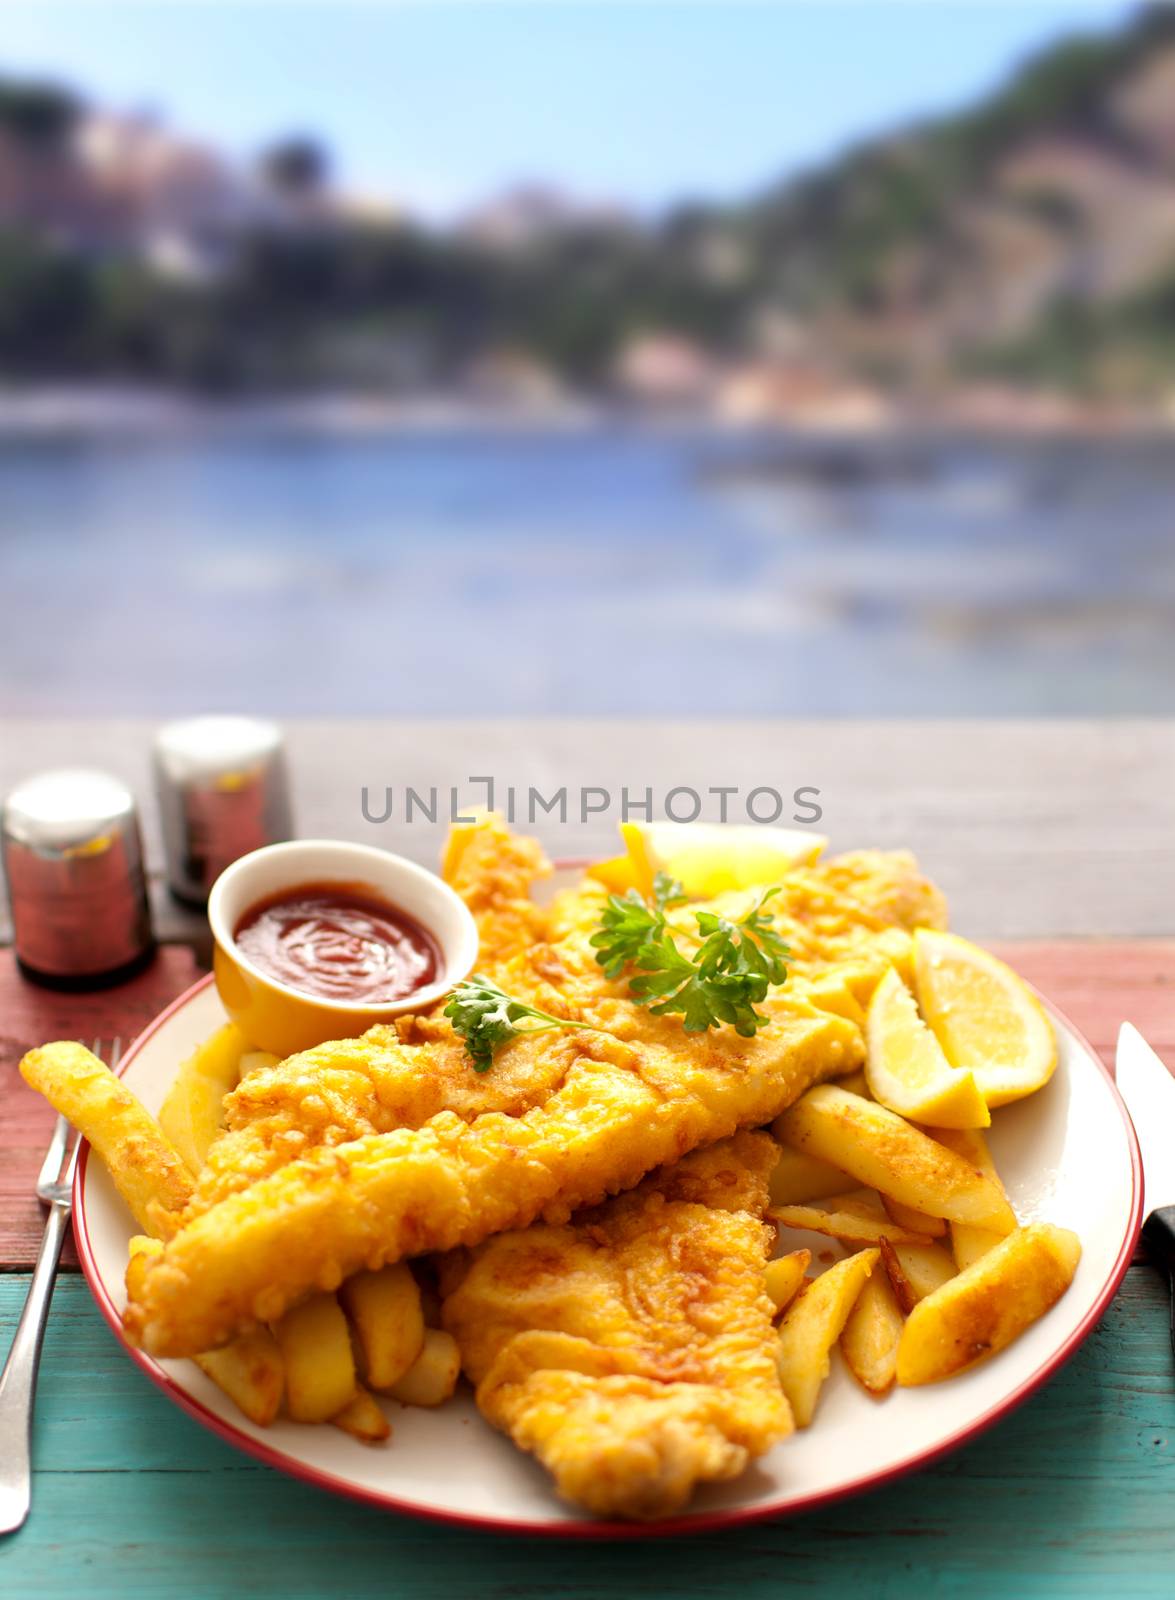 Fish and chips by the sea by unikpix